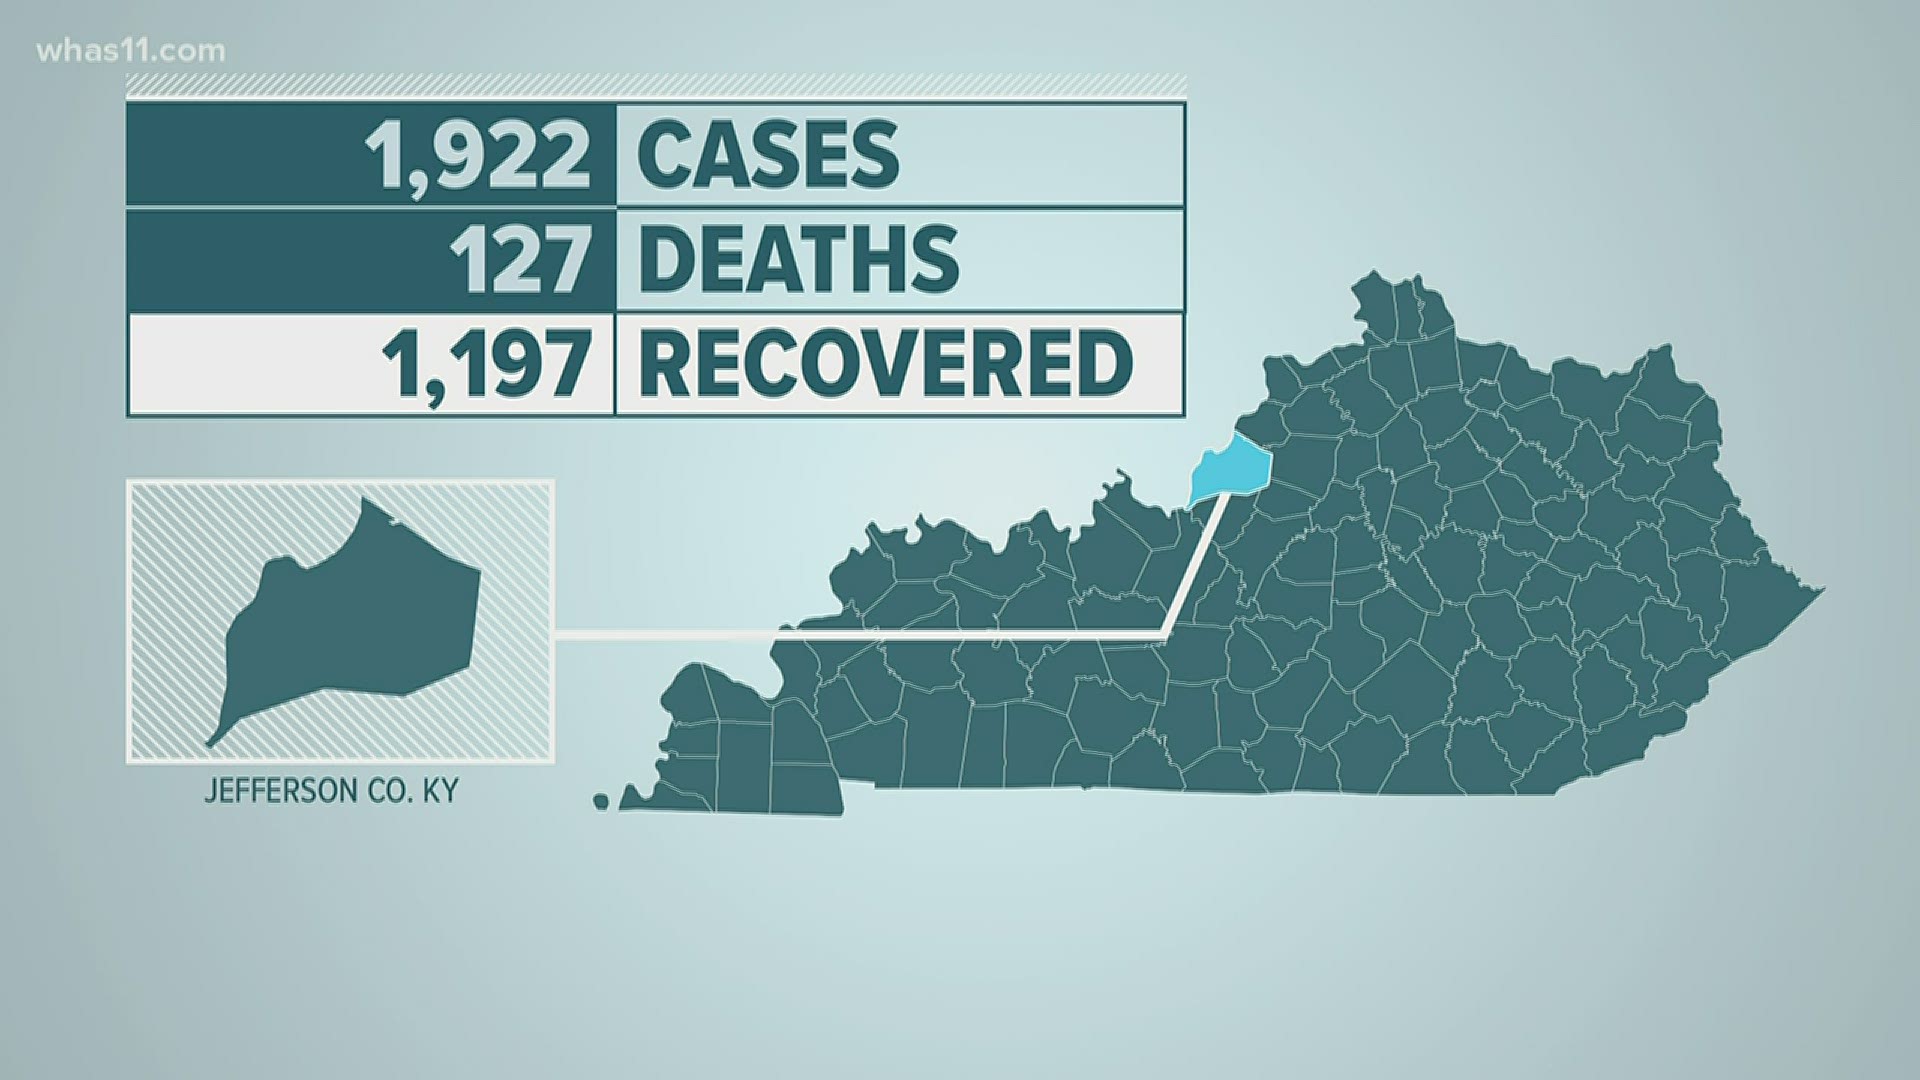 Beshear didn't hold a presser on Saturday but say 244 new cases of COVID-19 were confirmed. There were also 2 more deaths.